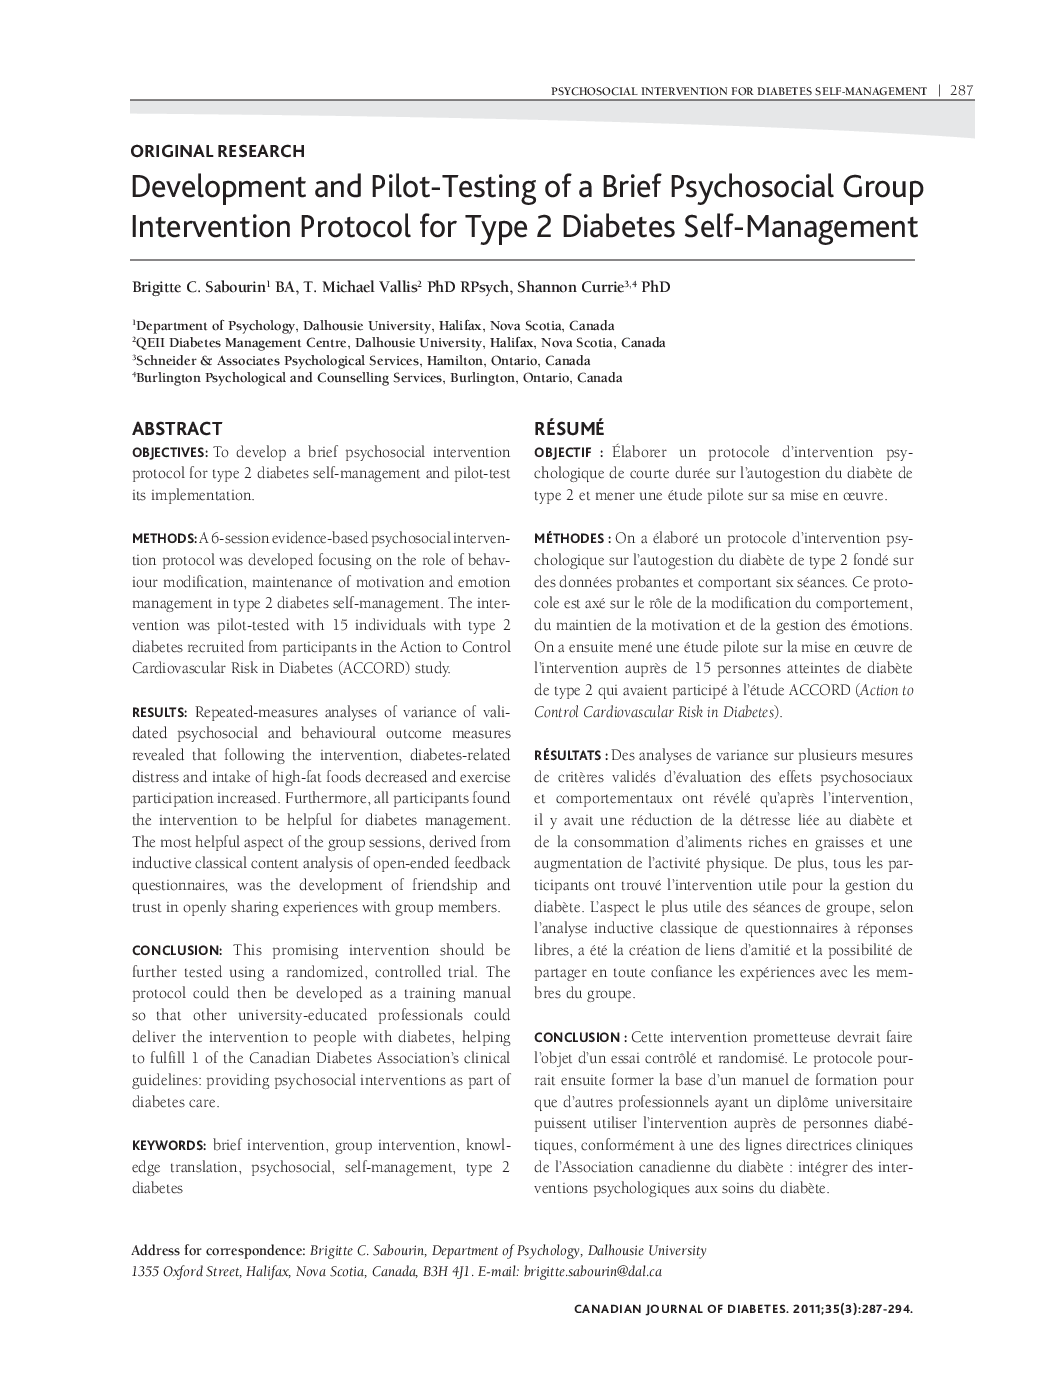 Development and Pilot-Testing of a Brief Psychosocial Group Intervention Protocol for Type 2 Diabetes Self-Management